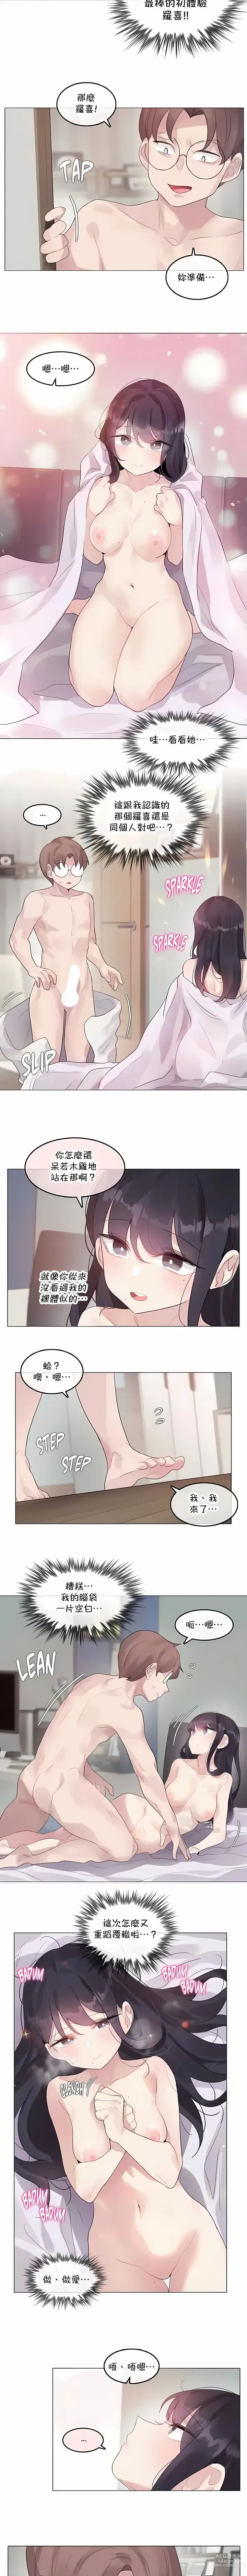 Page 1089 of doujinshi A Pervert's Daily Life 第1-4季 1-144